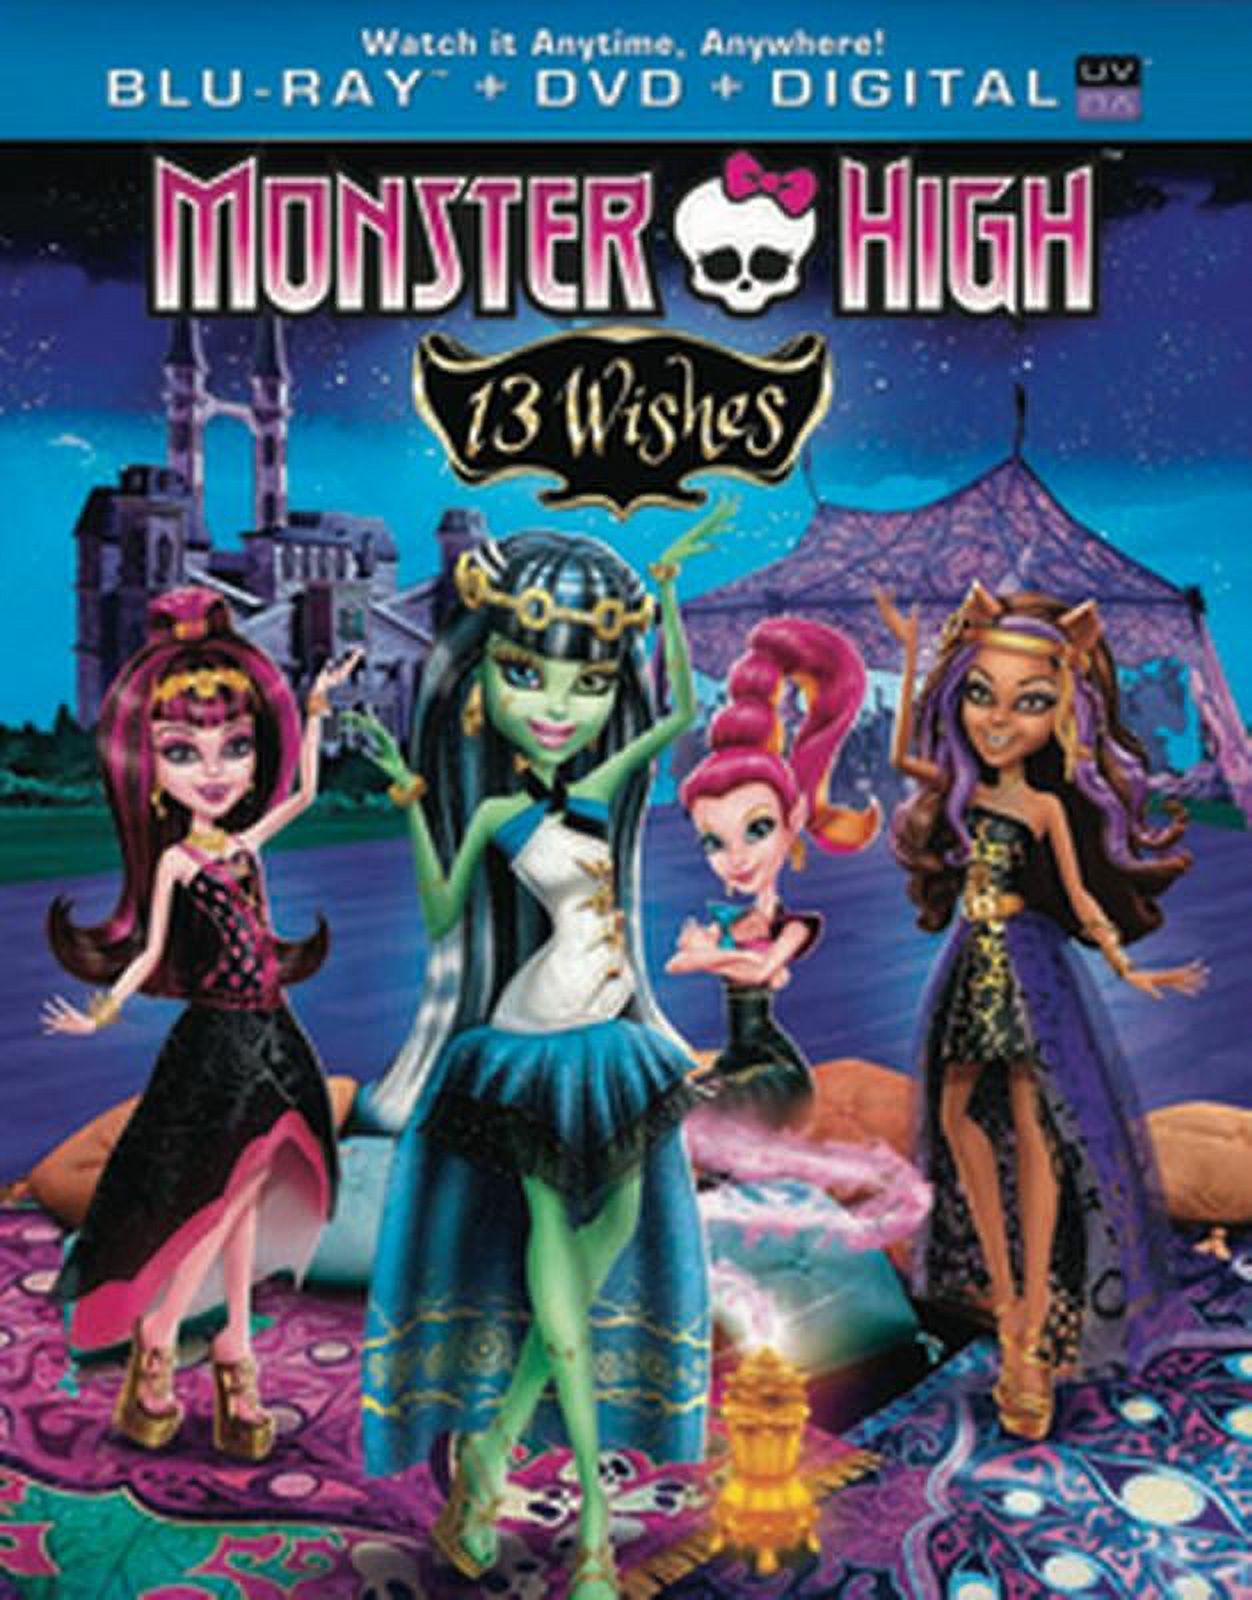 Monster High: 13 Wishes (Blu-ray) - image 1 of 2